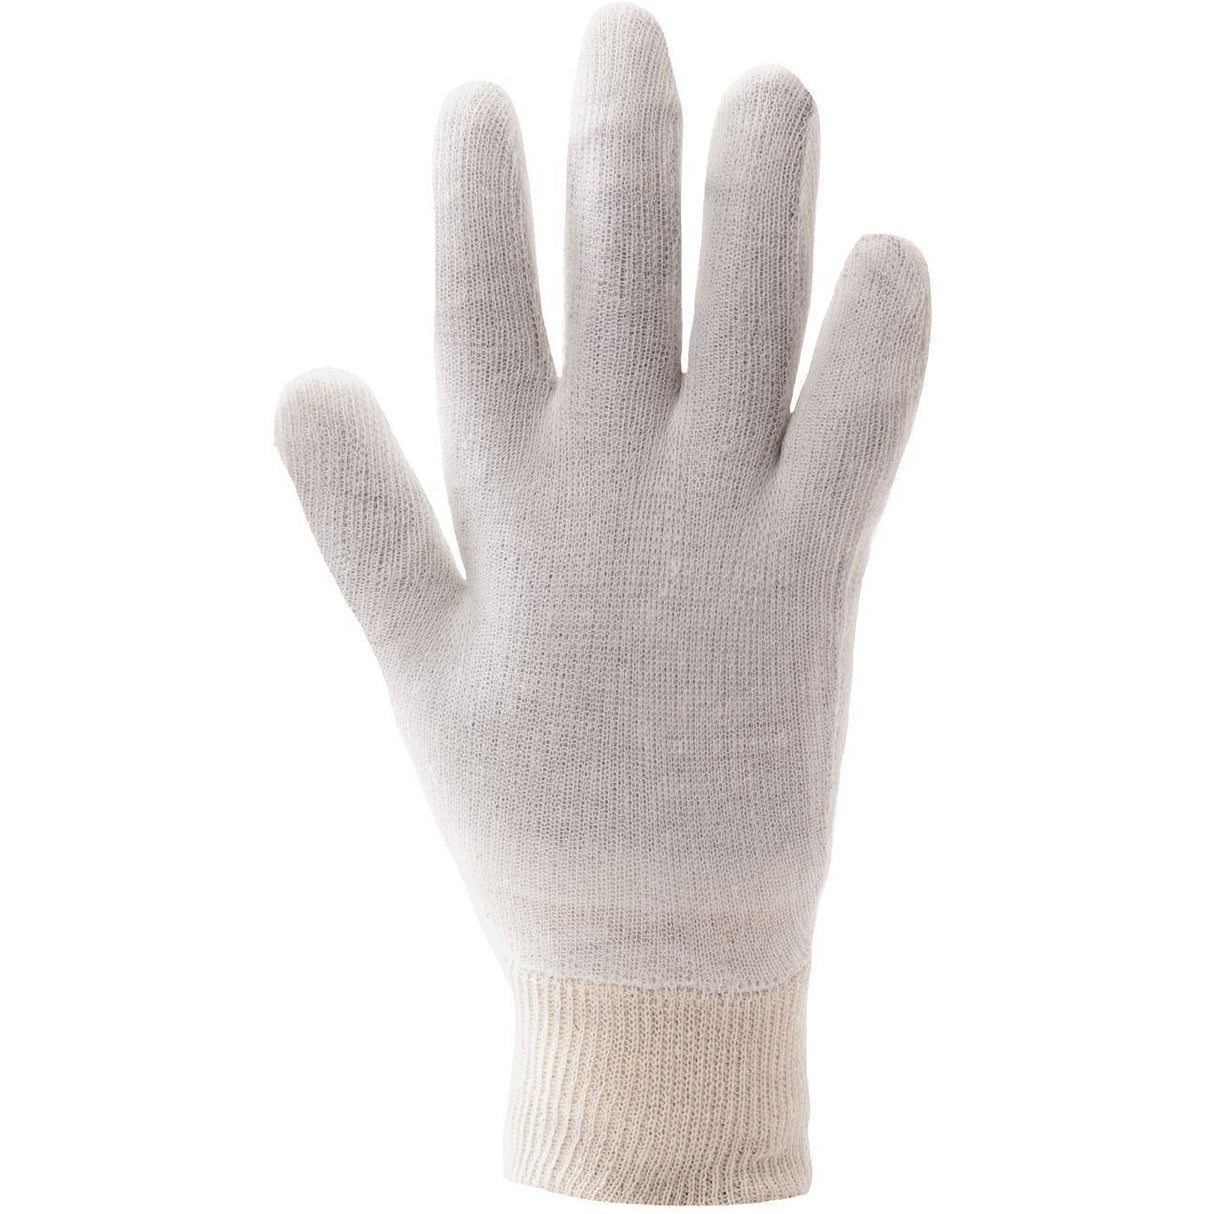 Portwest Stockinette Knitwrist Glove X-Large (Pack of 600)